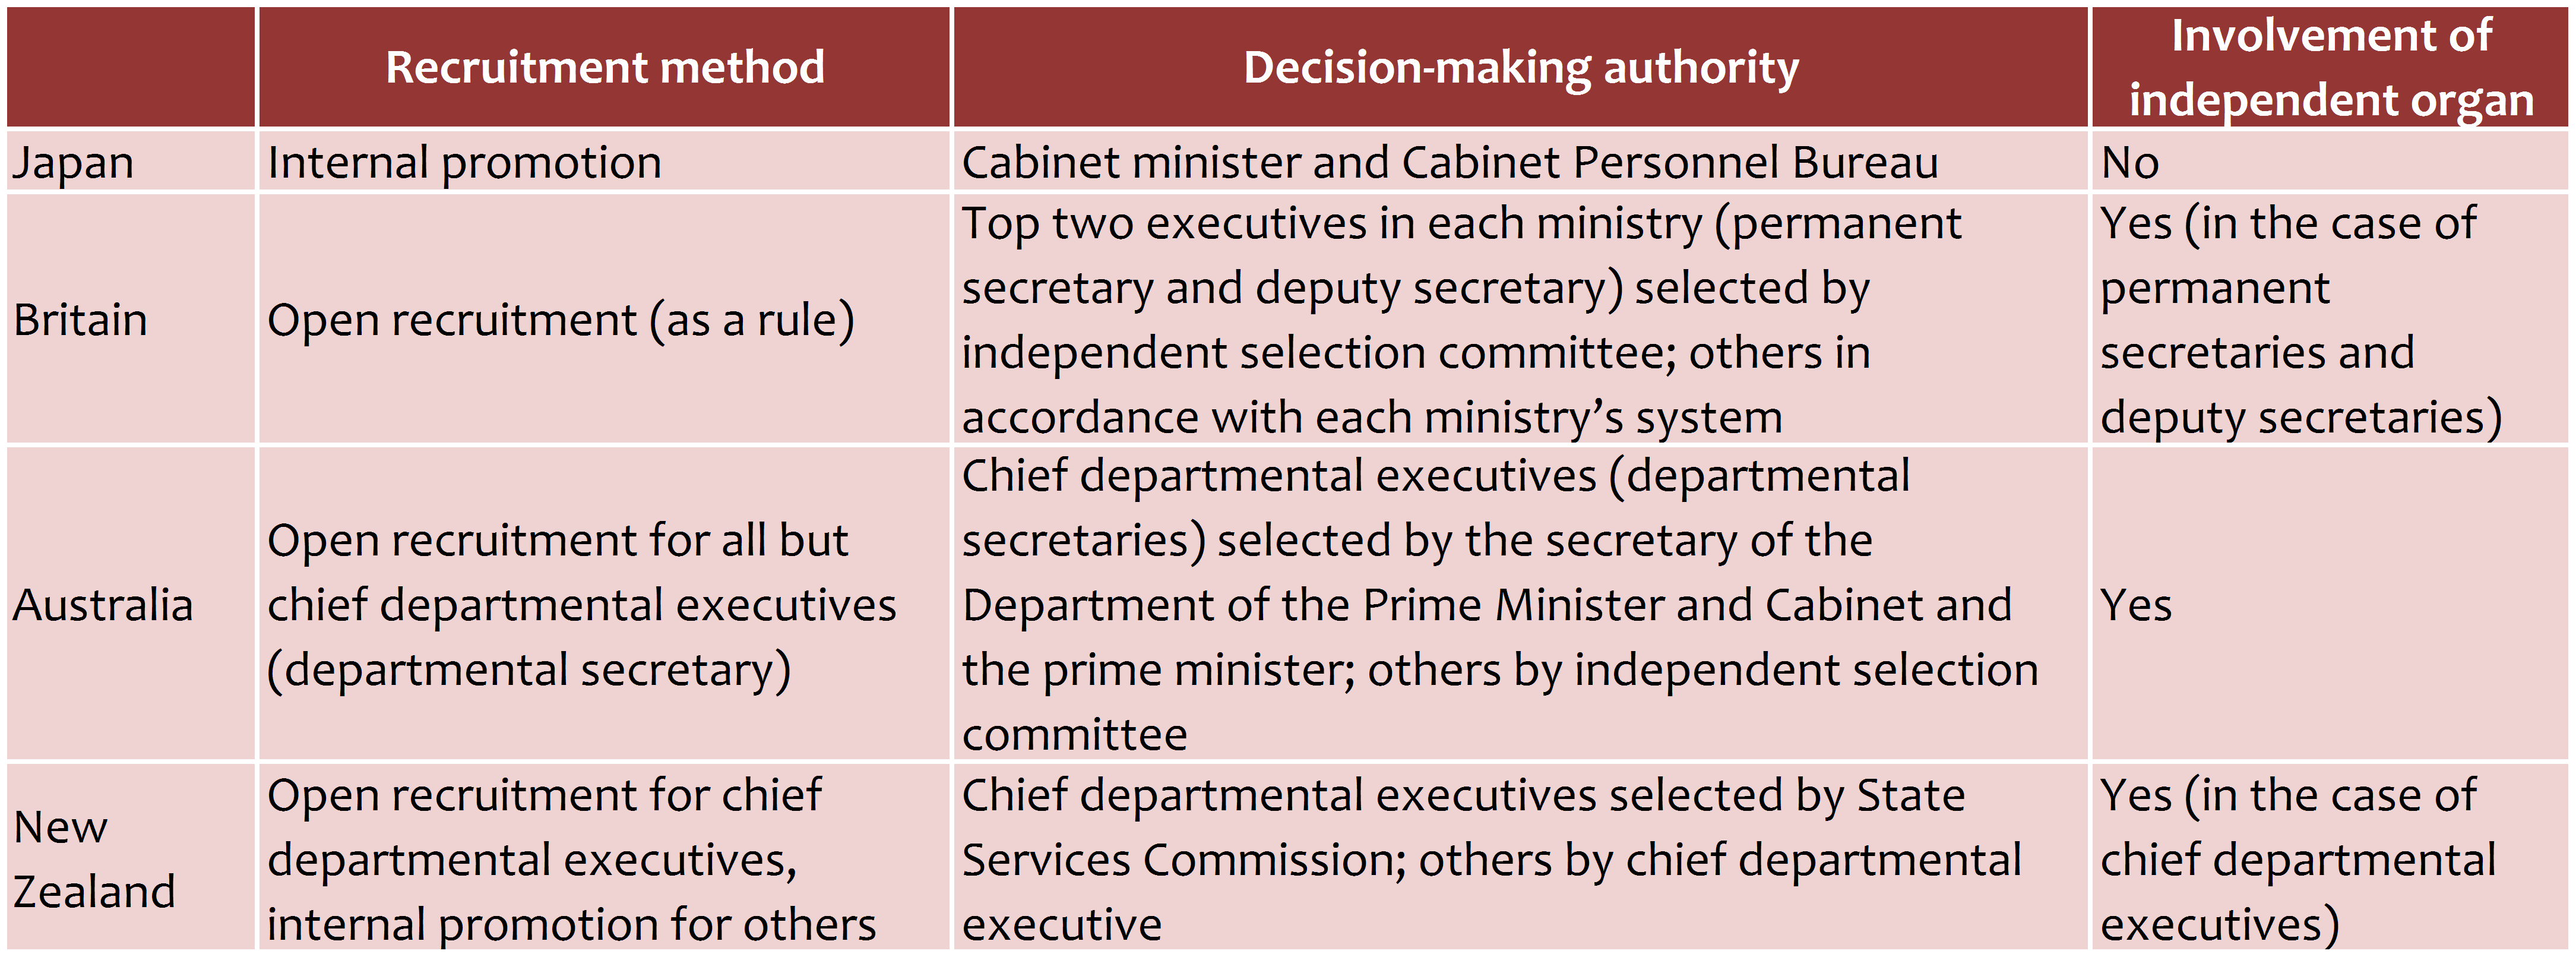 Senior Civil Service Appointments in Selected Parliamentary Democracies